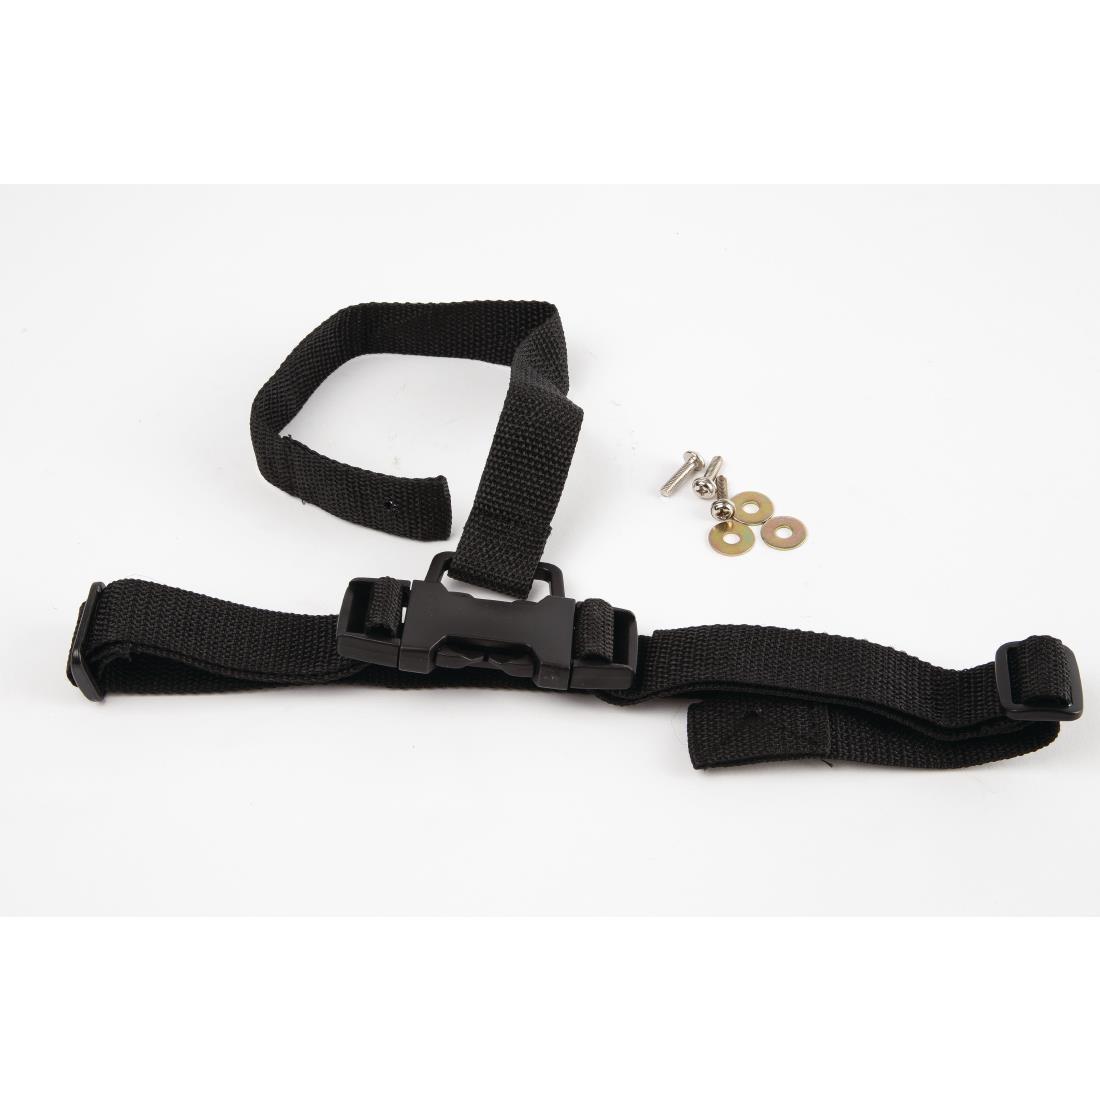 Bolero Spare 3-Point Harness DL833, DL900 and DL901 (Post 2014) - AF407  - 2